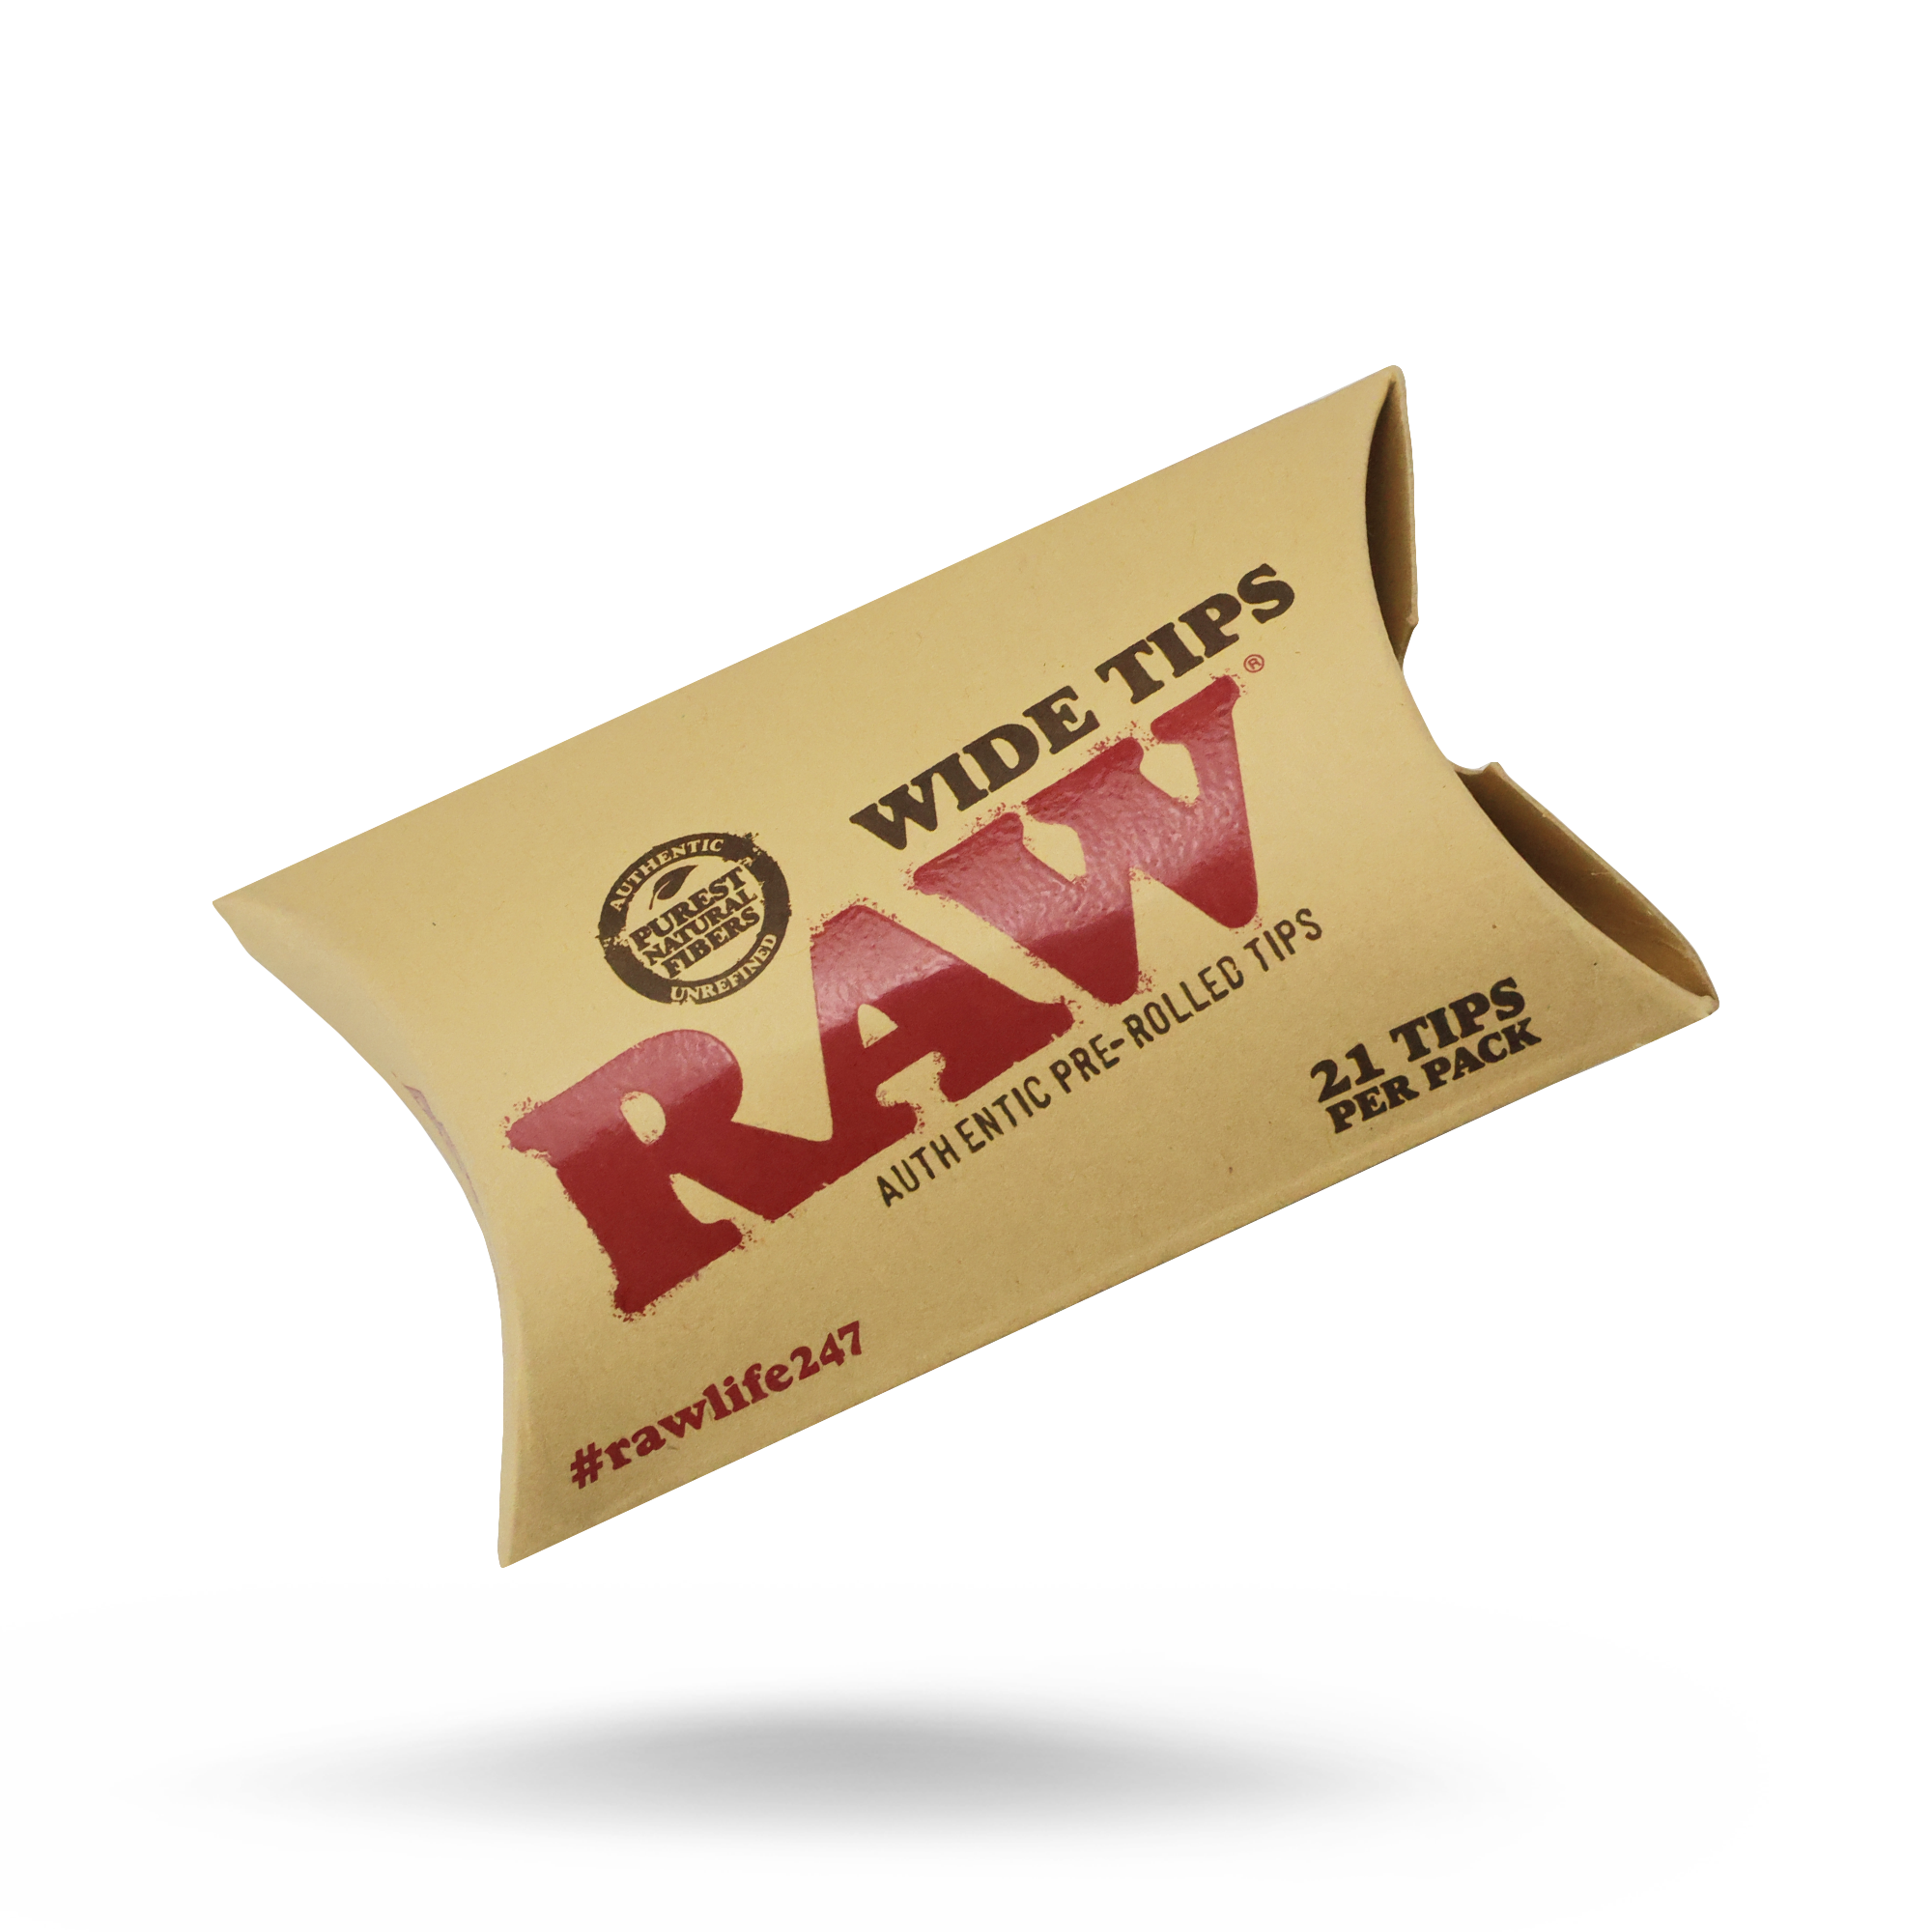 RAW Pre Rolled Tips  21 Per Pack - American Rolling Club